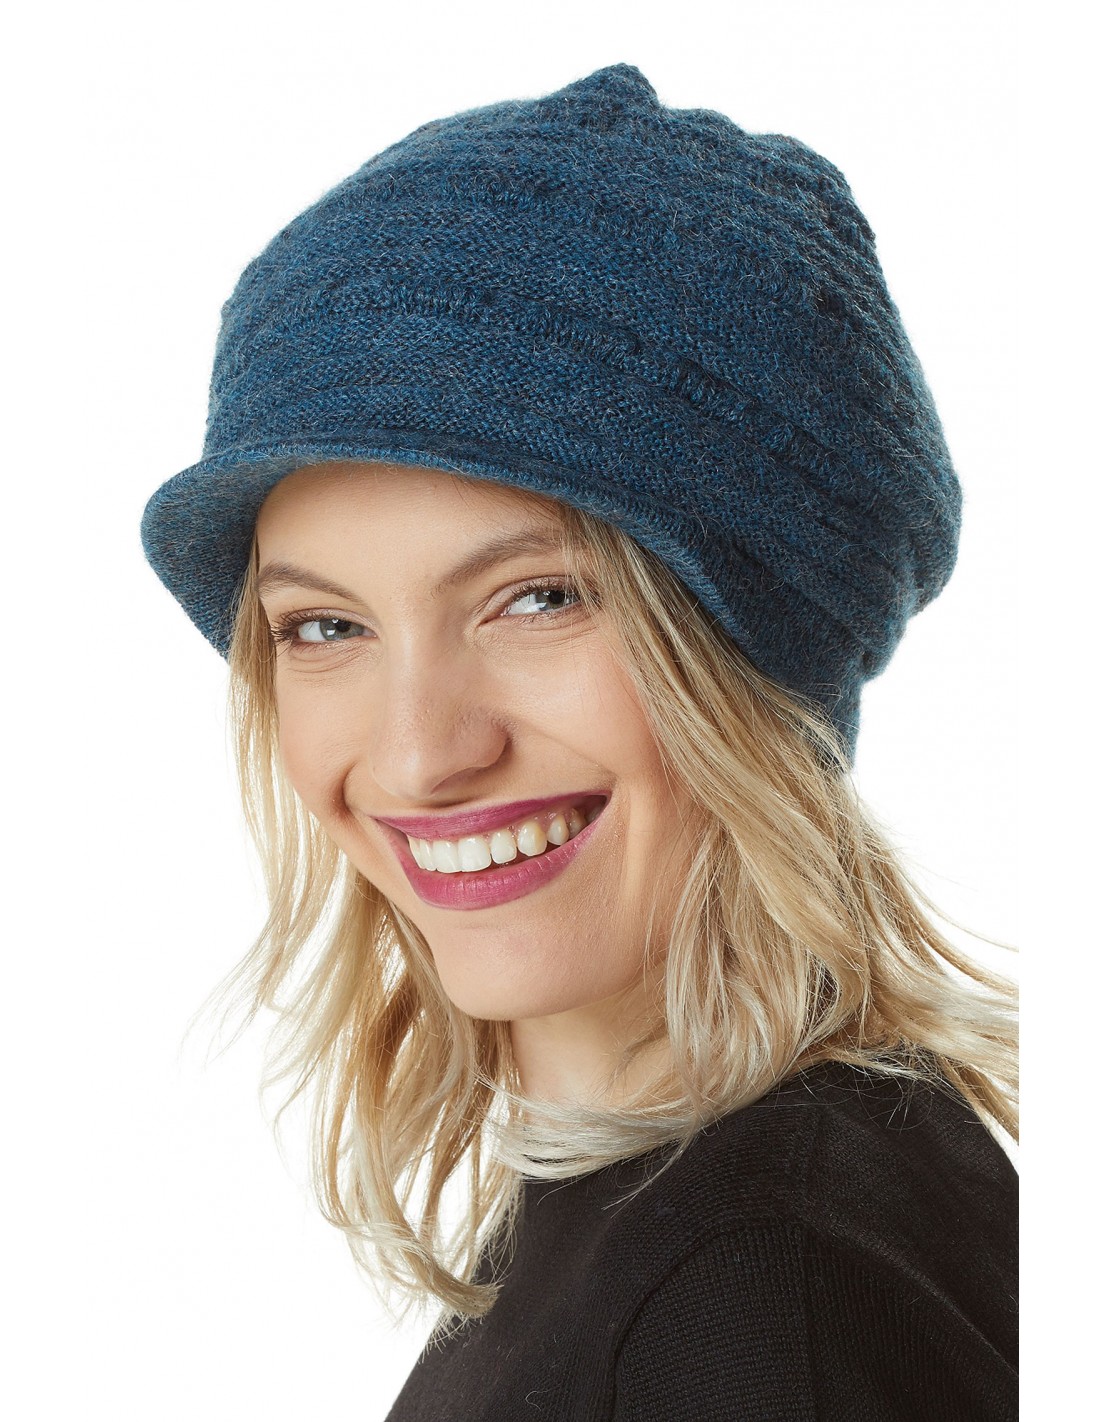 Knitted peaked cap